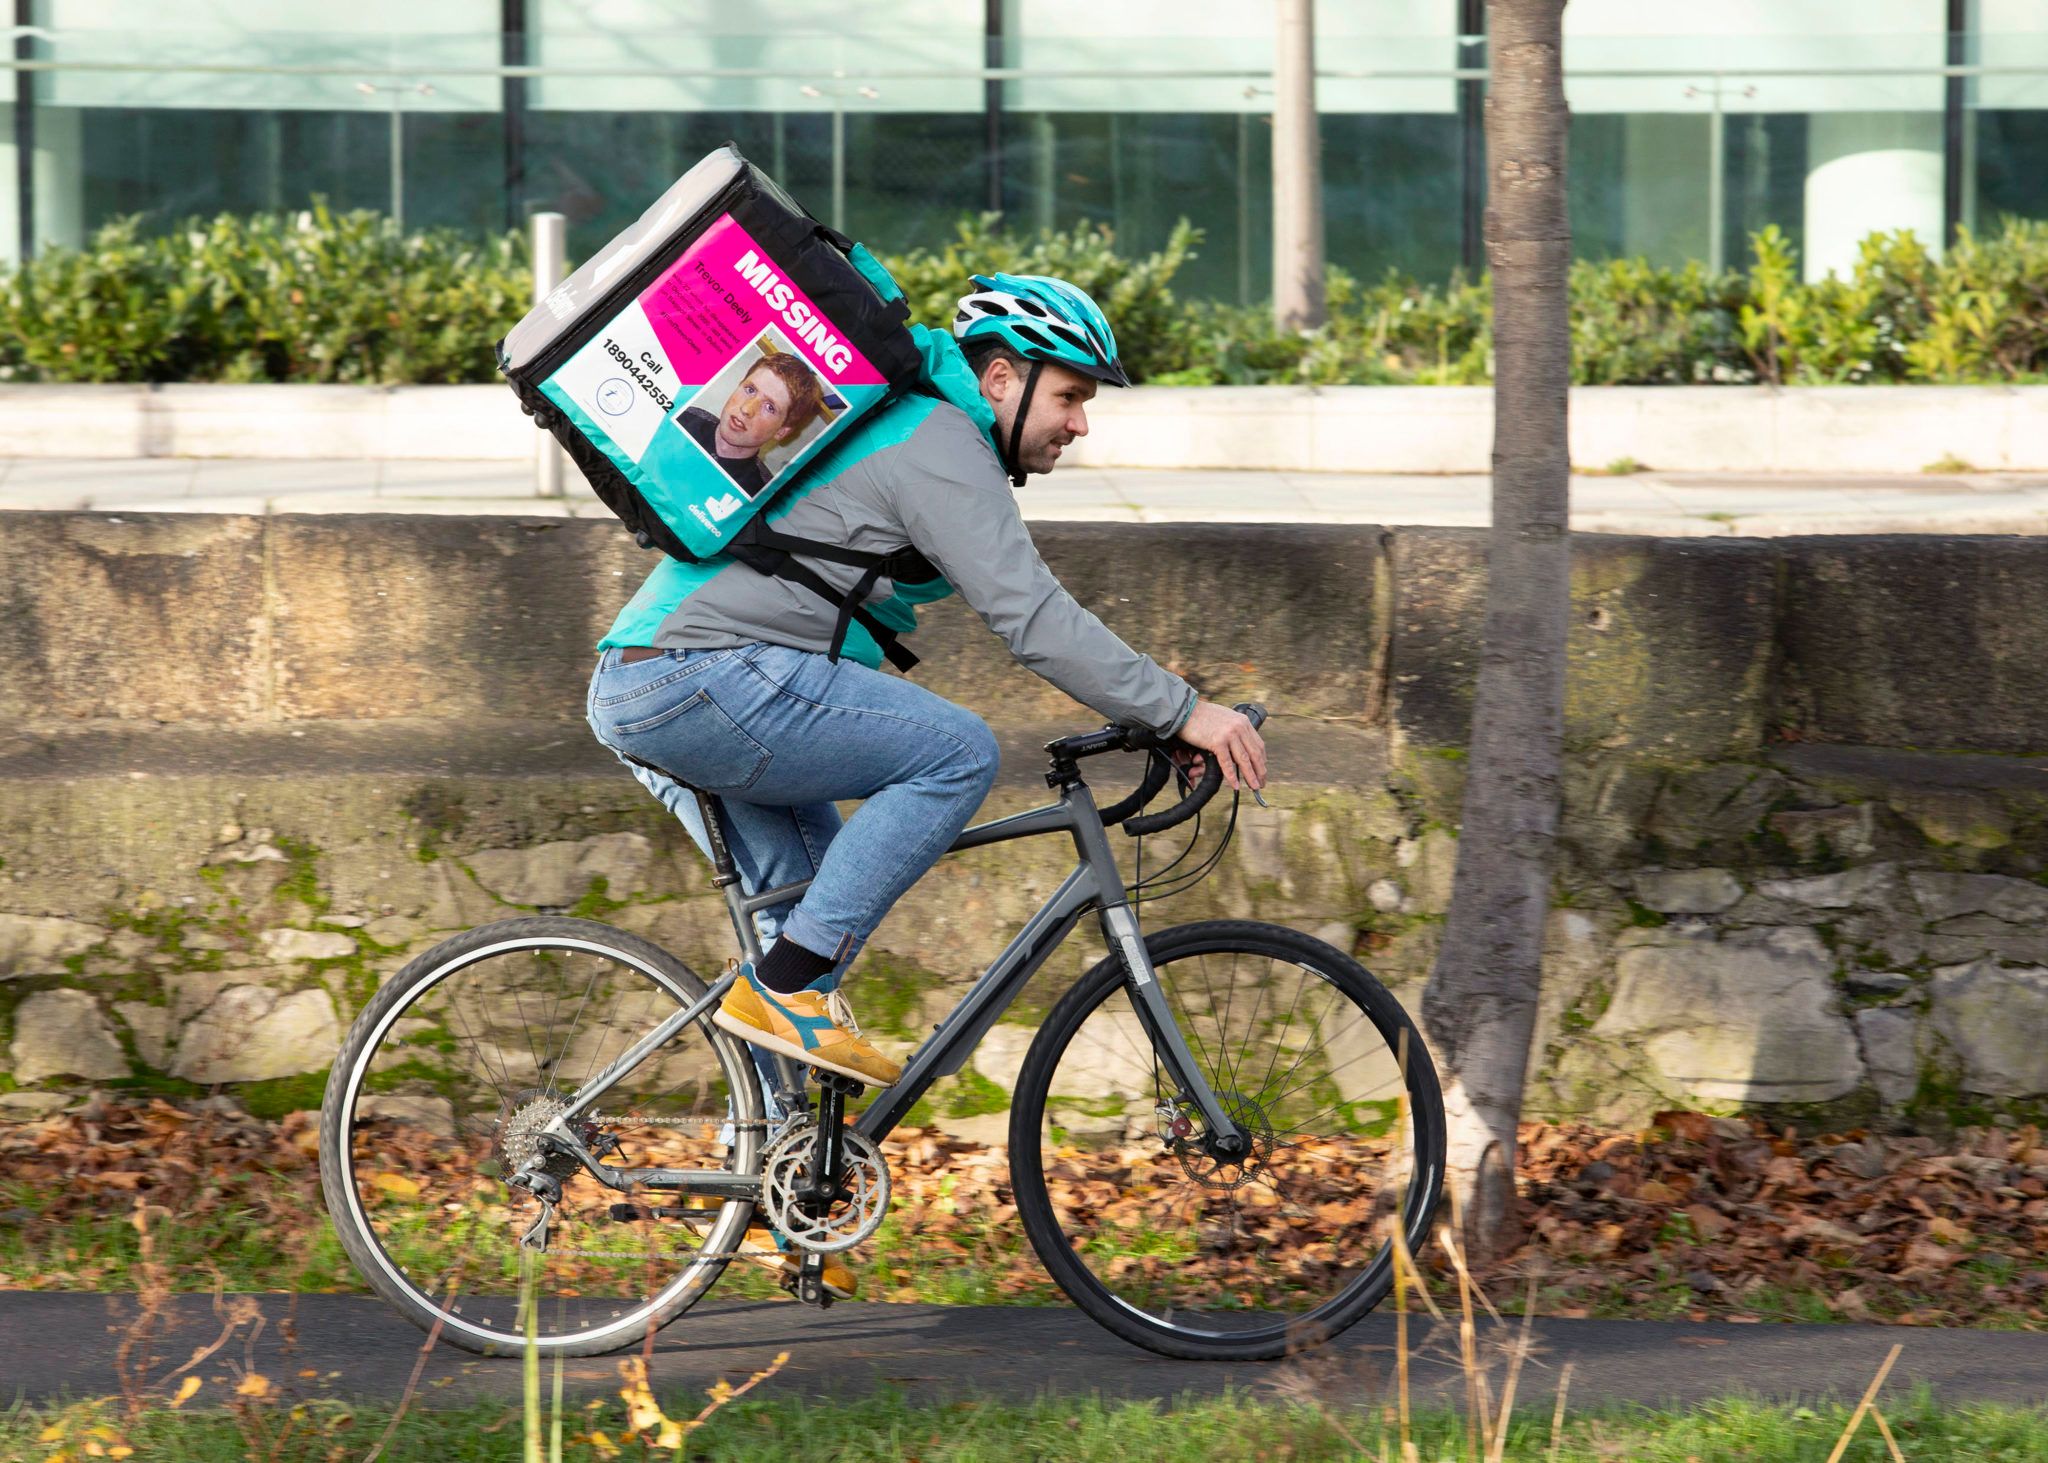 Photos of missing people to appear on Deliveroo riders’ bags this month